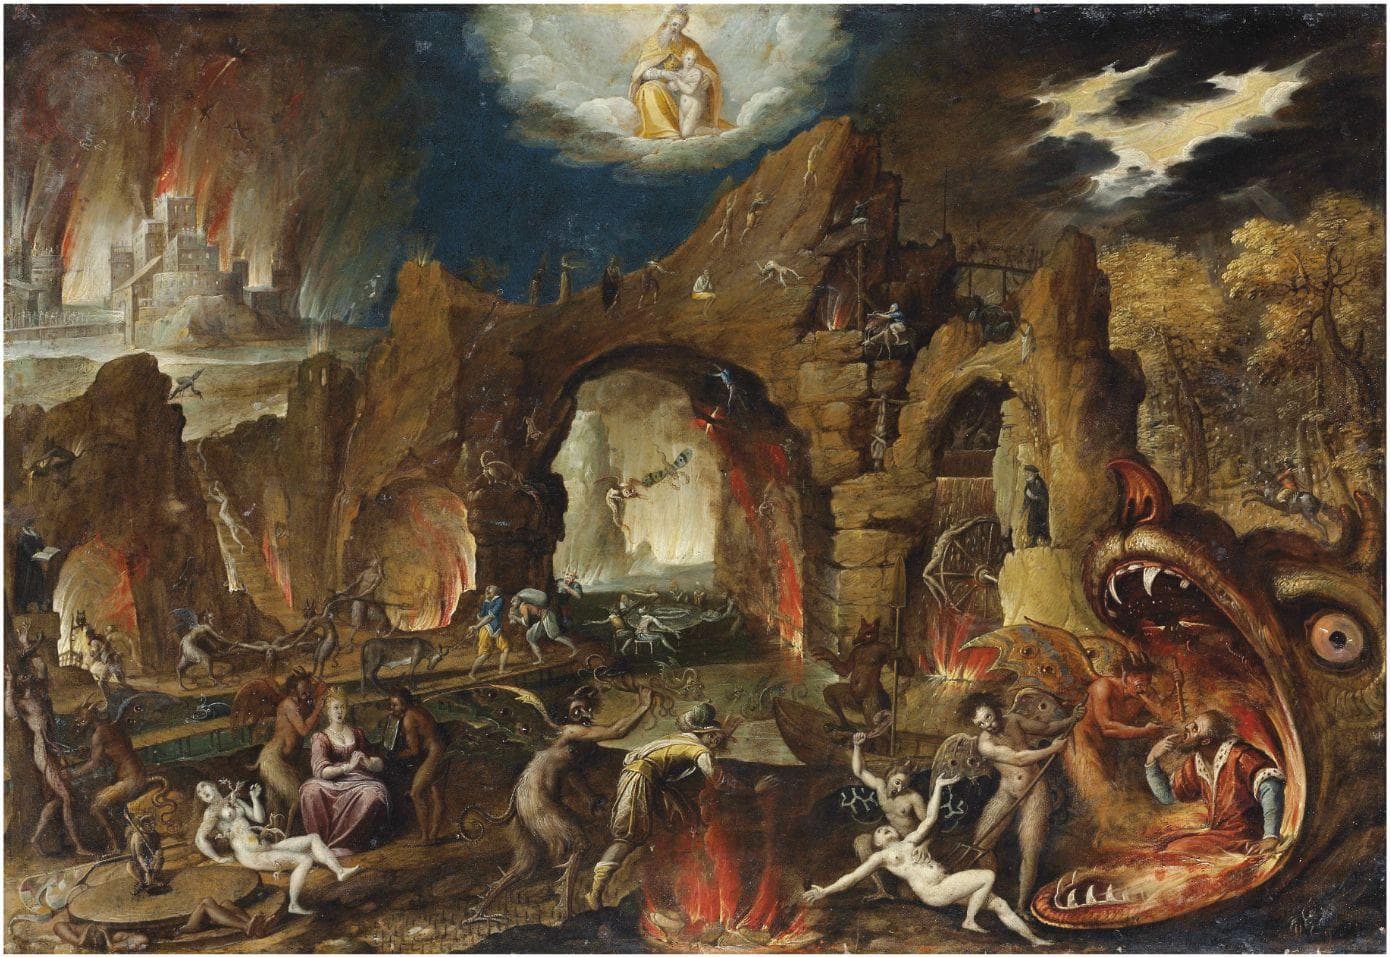 The most harrowing paintings of Hell inspired by Dante's “Inferno”